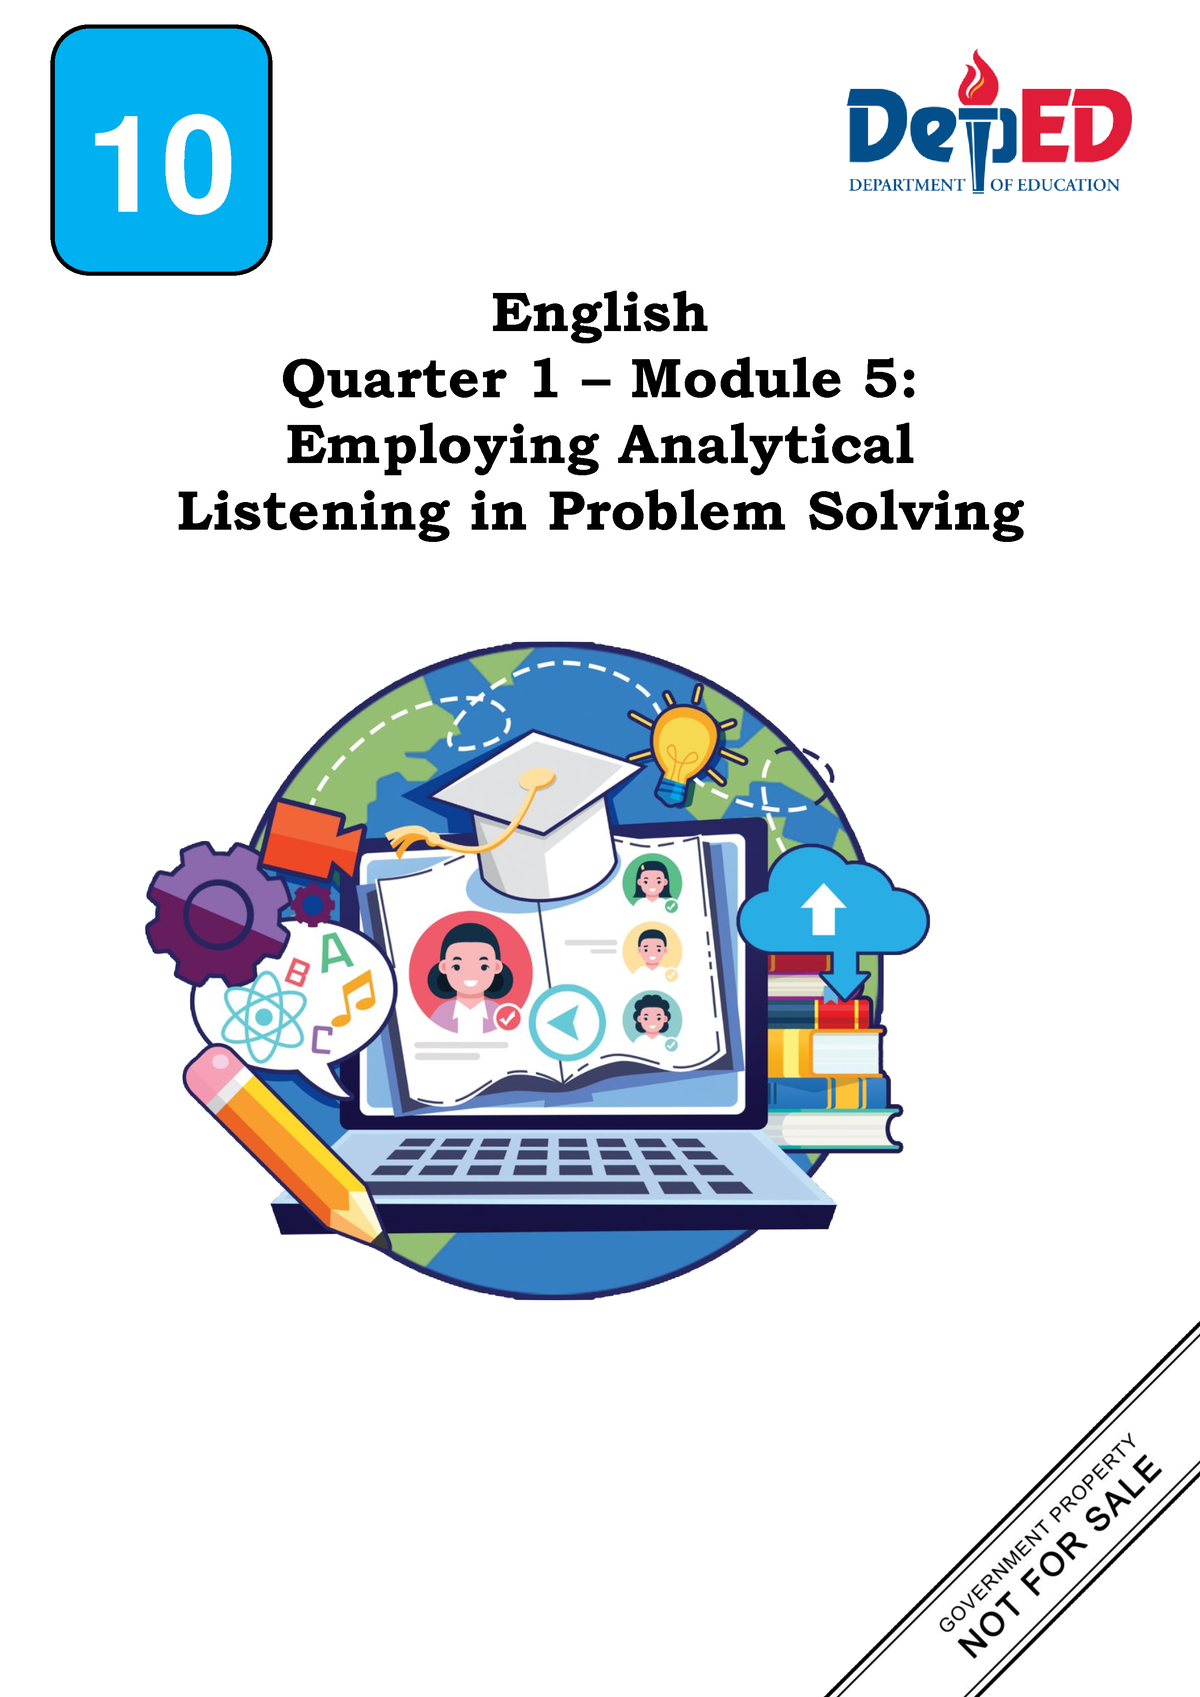 employ analytical listening in problem solving lesson plan slide